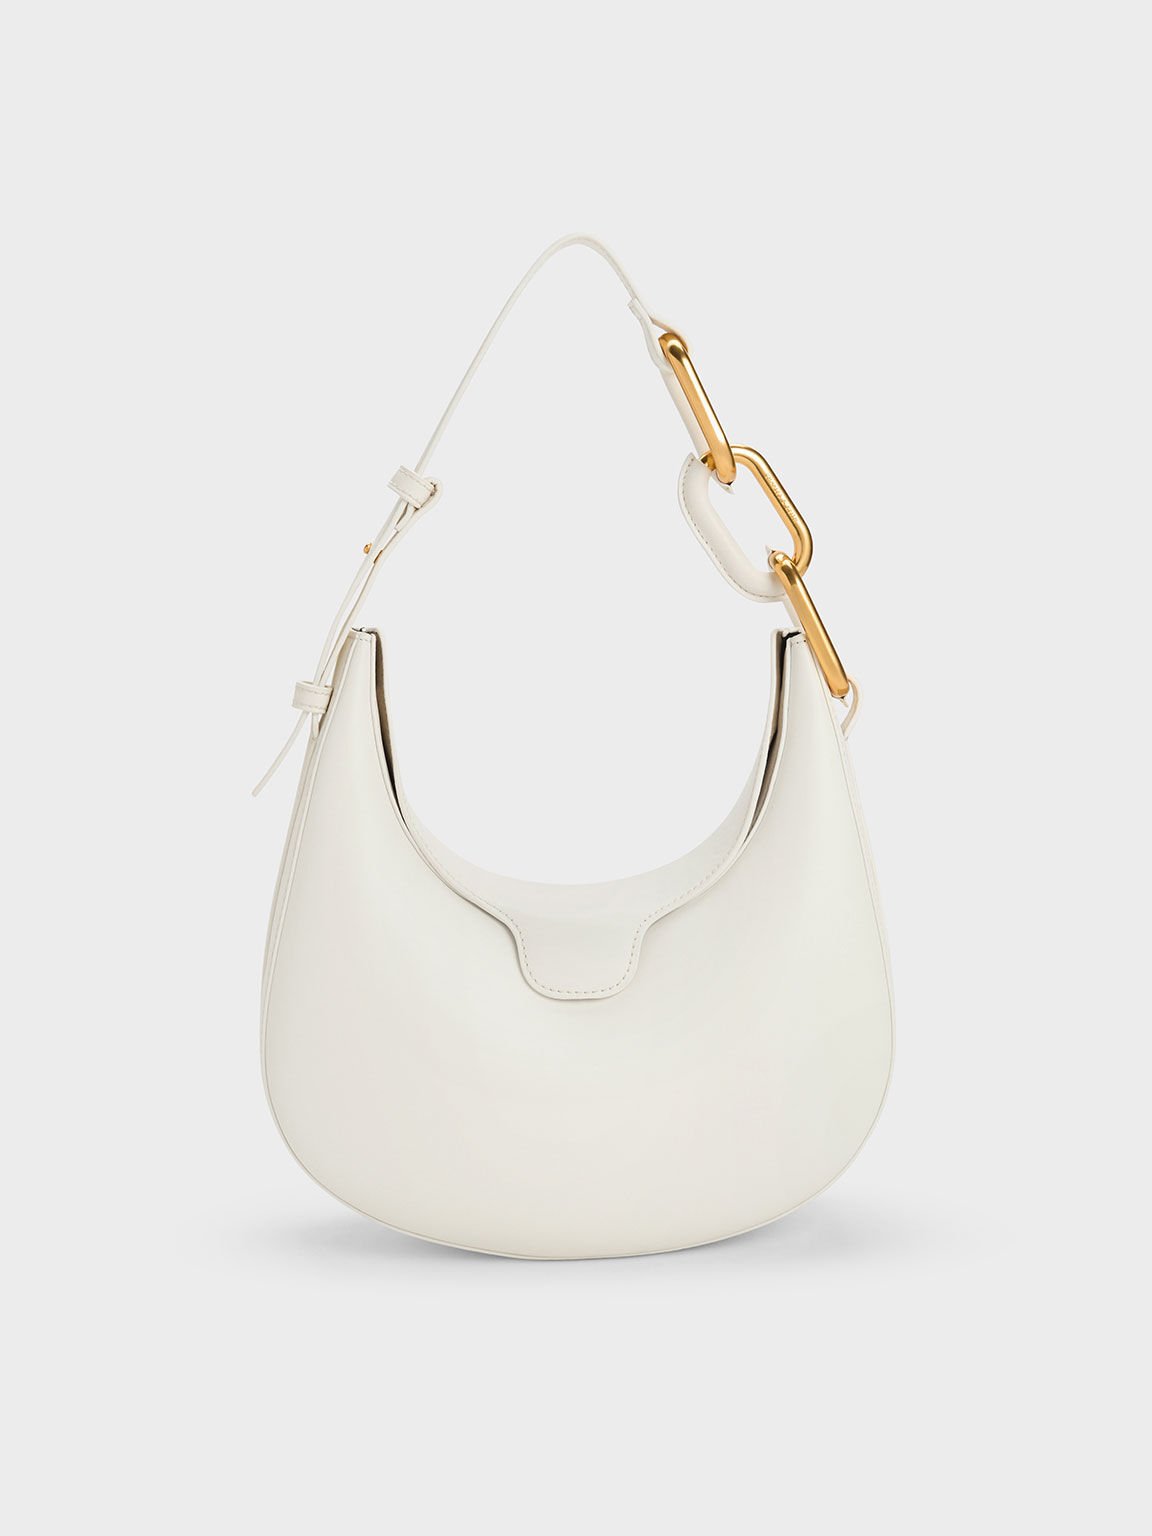 Charles & Keith - Women's Chain Handle Shoulder Bag, White, M